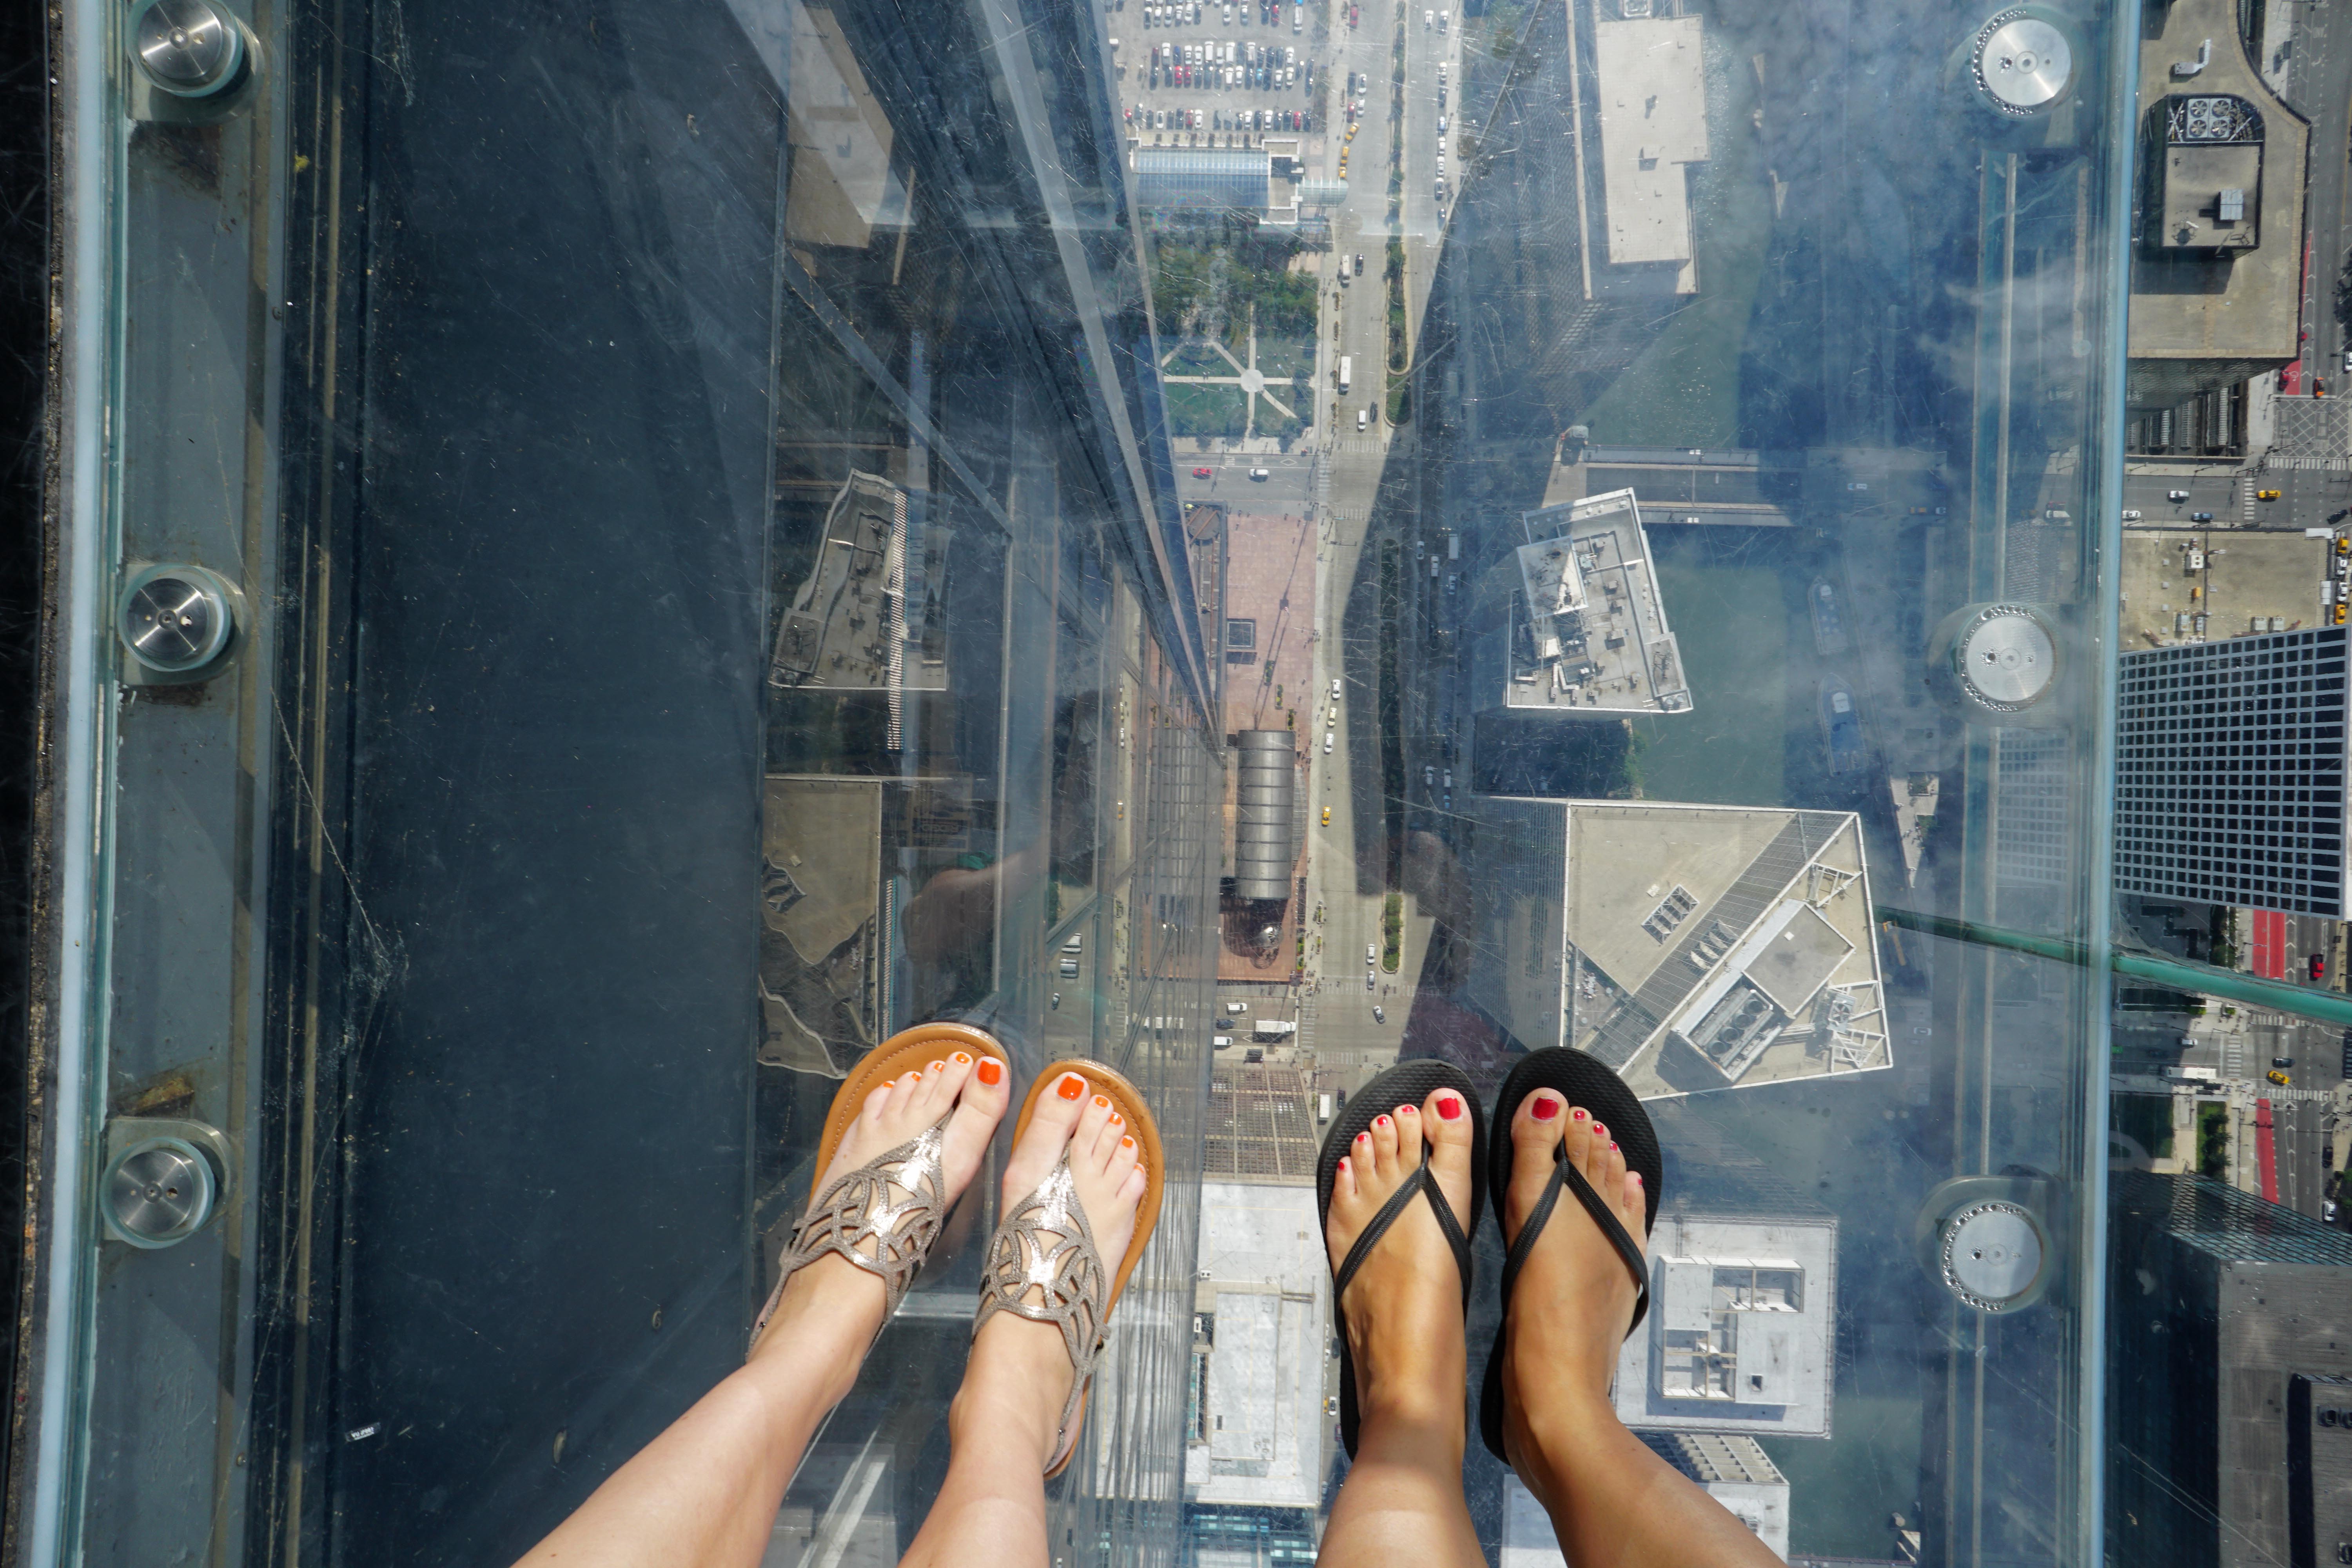 View of our feet looking down through the glass floor of The Ledge 